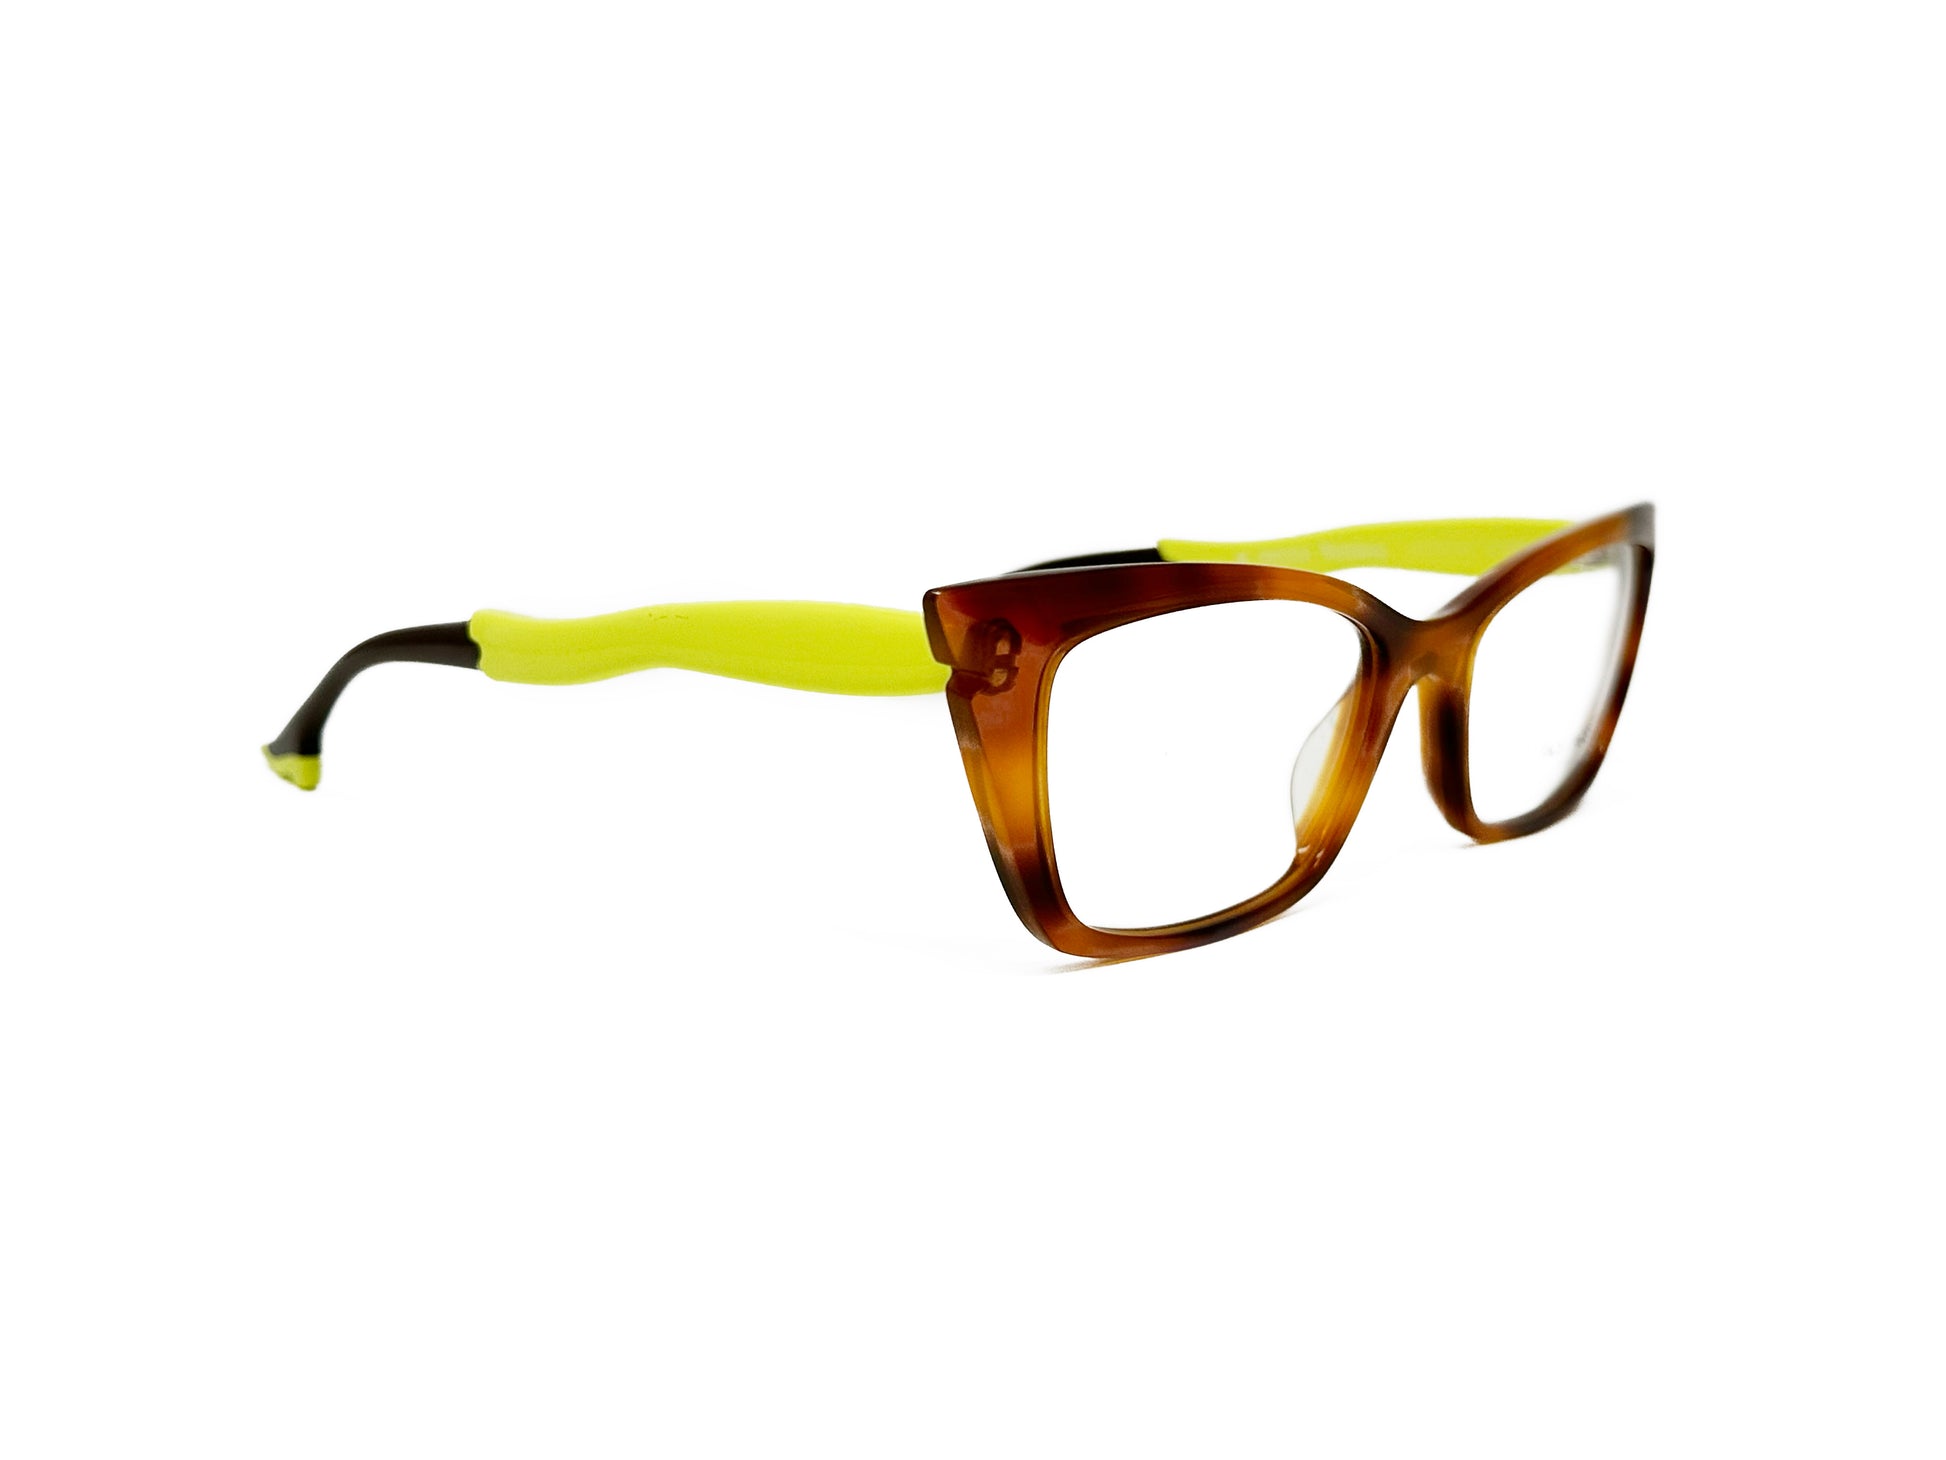 Face a Face rectangular, cat-eye, acetate optical frame with temples that look like legs wearing heels. Model: Sixties 2. Color: 053 - Tortoise with neon yellow legs. Side angleview.